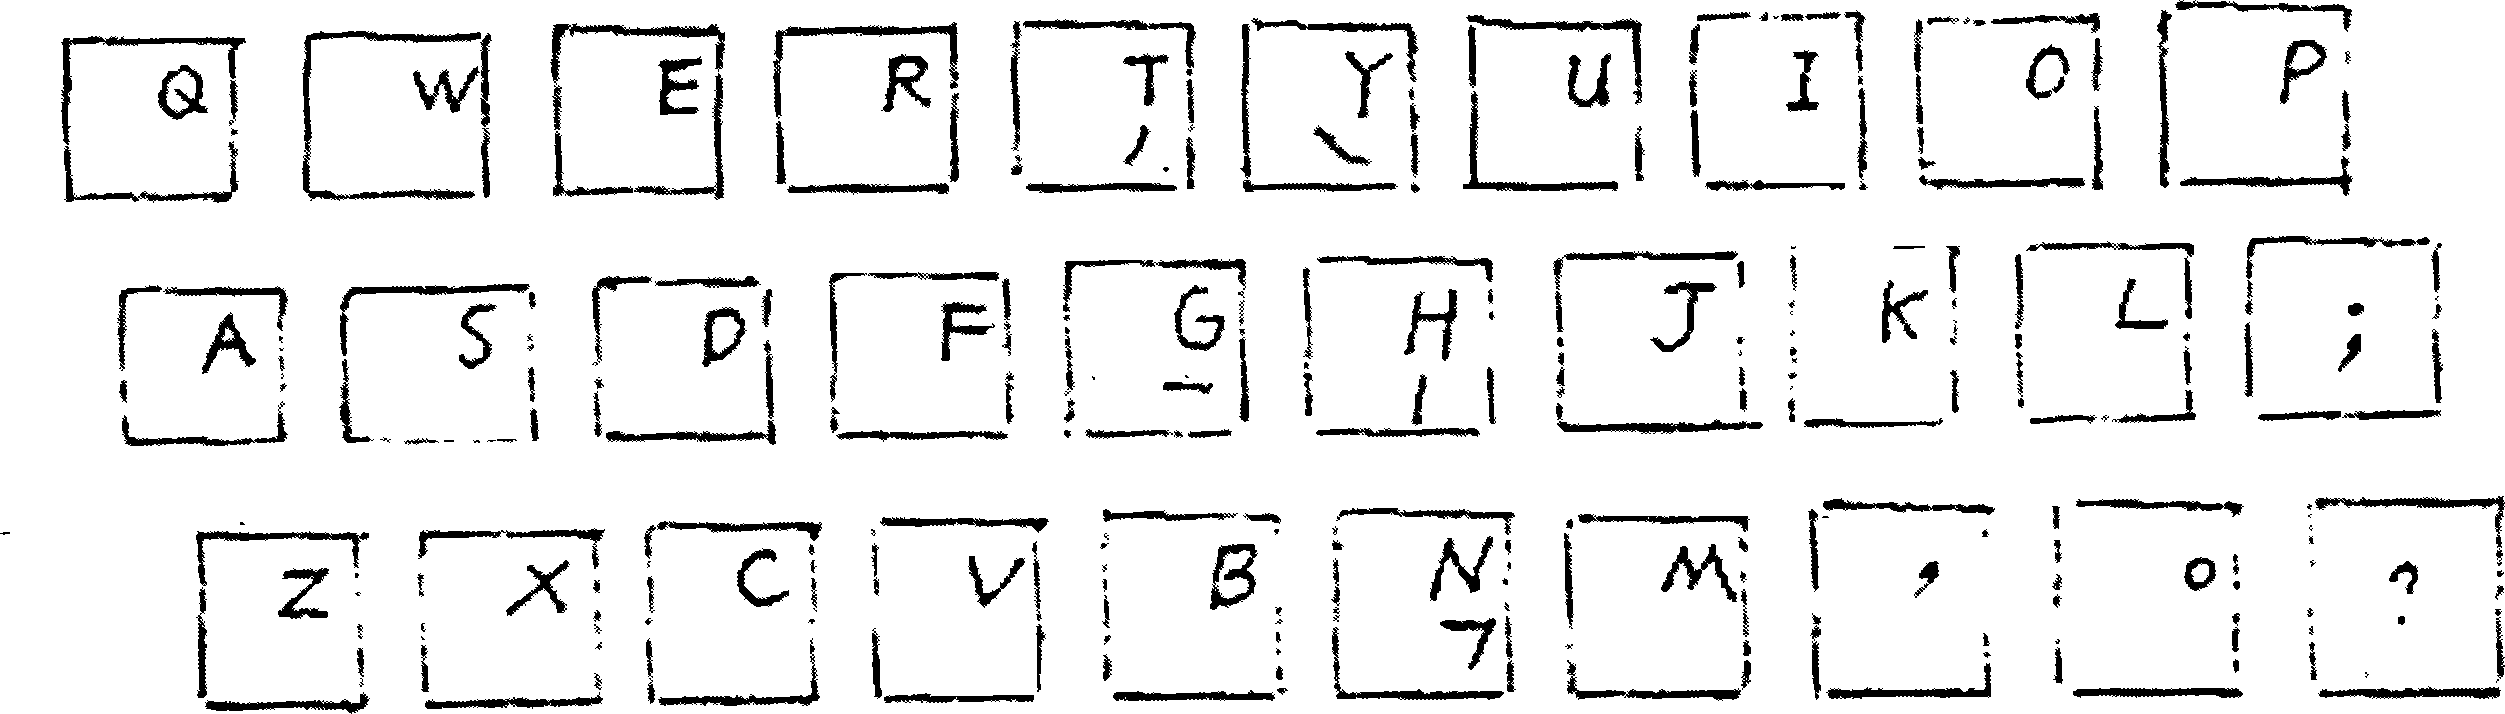 Chinese-character input method and its corresponding keyboard